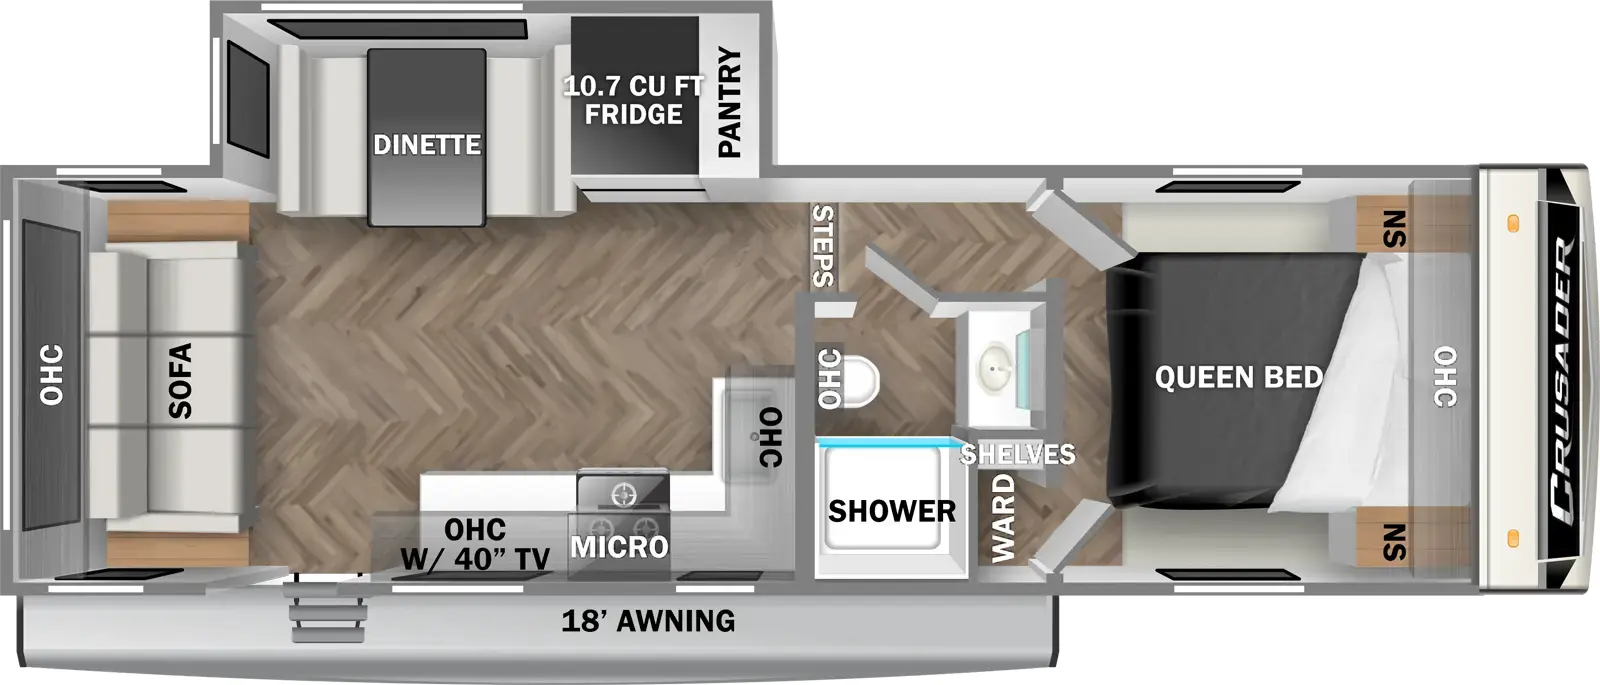 The 250RLX has one slideout and one entry. Exterior features an 18 foot awning. Interior layout front to back: foot-facing queen bed with overhead cabinet and wardrobes on each side, and a door side wardrobe with shelves along inner wall; door side full bathroom; off-door side steps down to main living area; off-door side slideout with pantry, refrigerator, and dinette; kitchen counter with sink and overhead cabinet wraps from inner wall to door side with cooktop, microwave, TV, and entry; rear sofa with overhead cabinet.